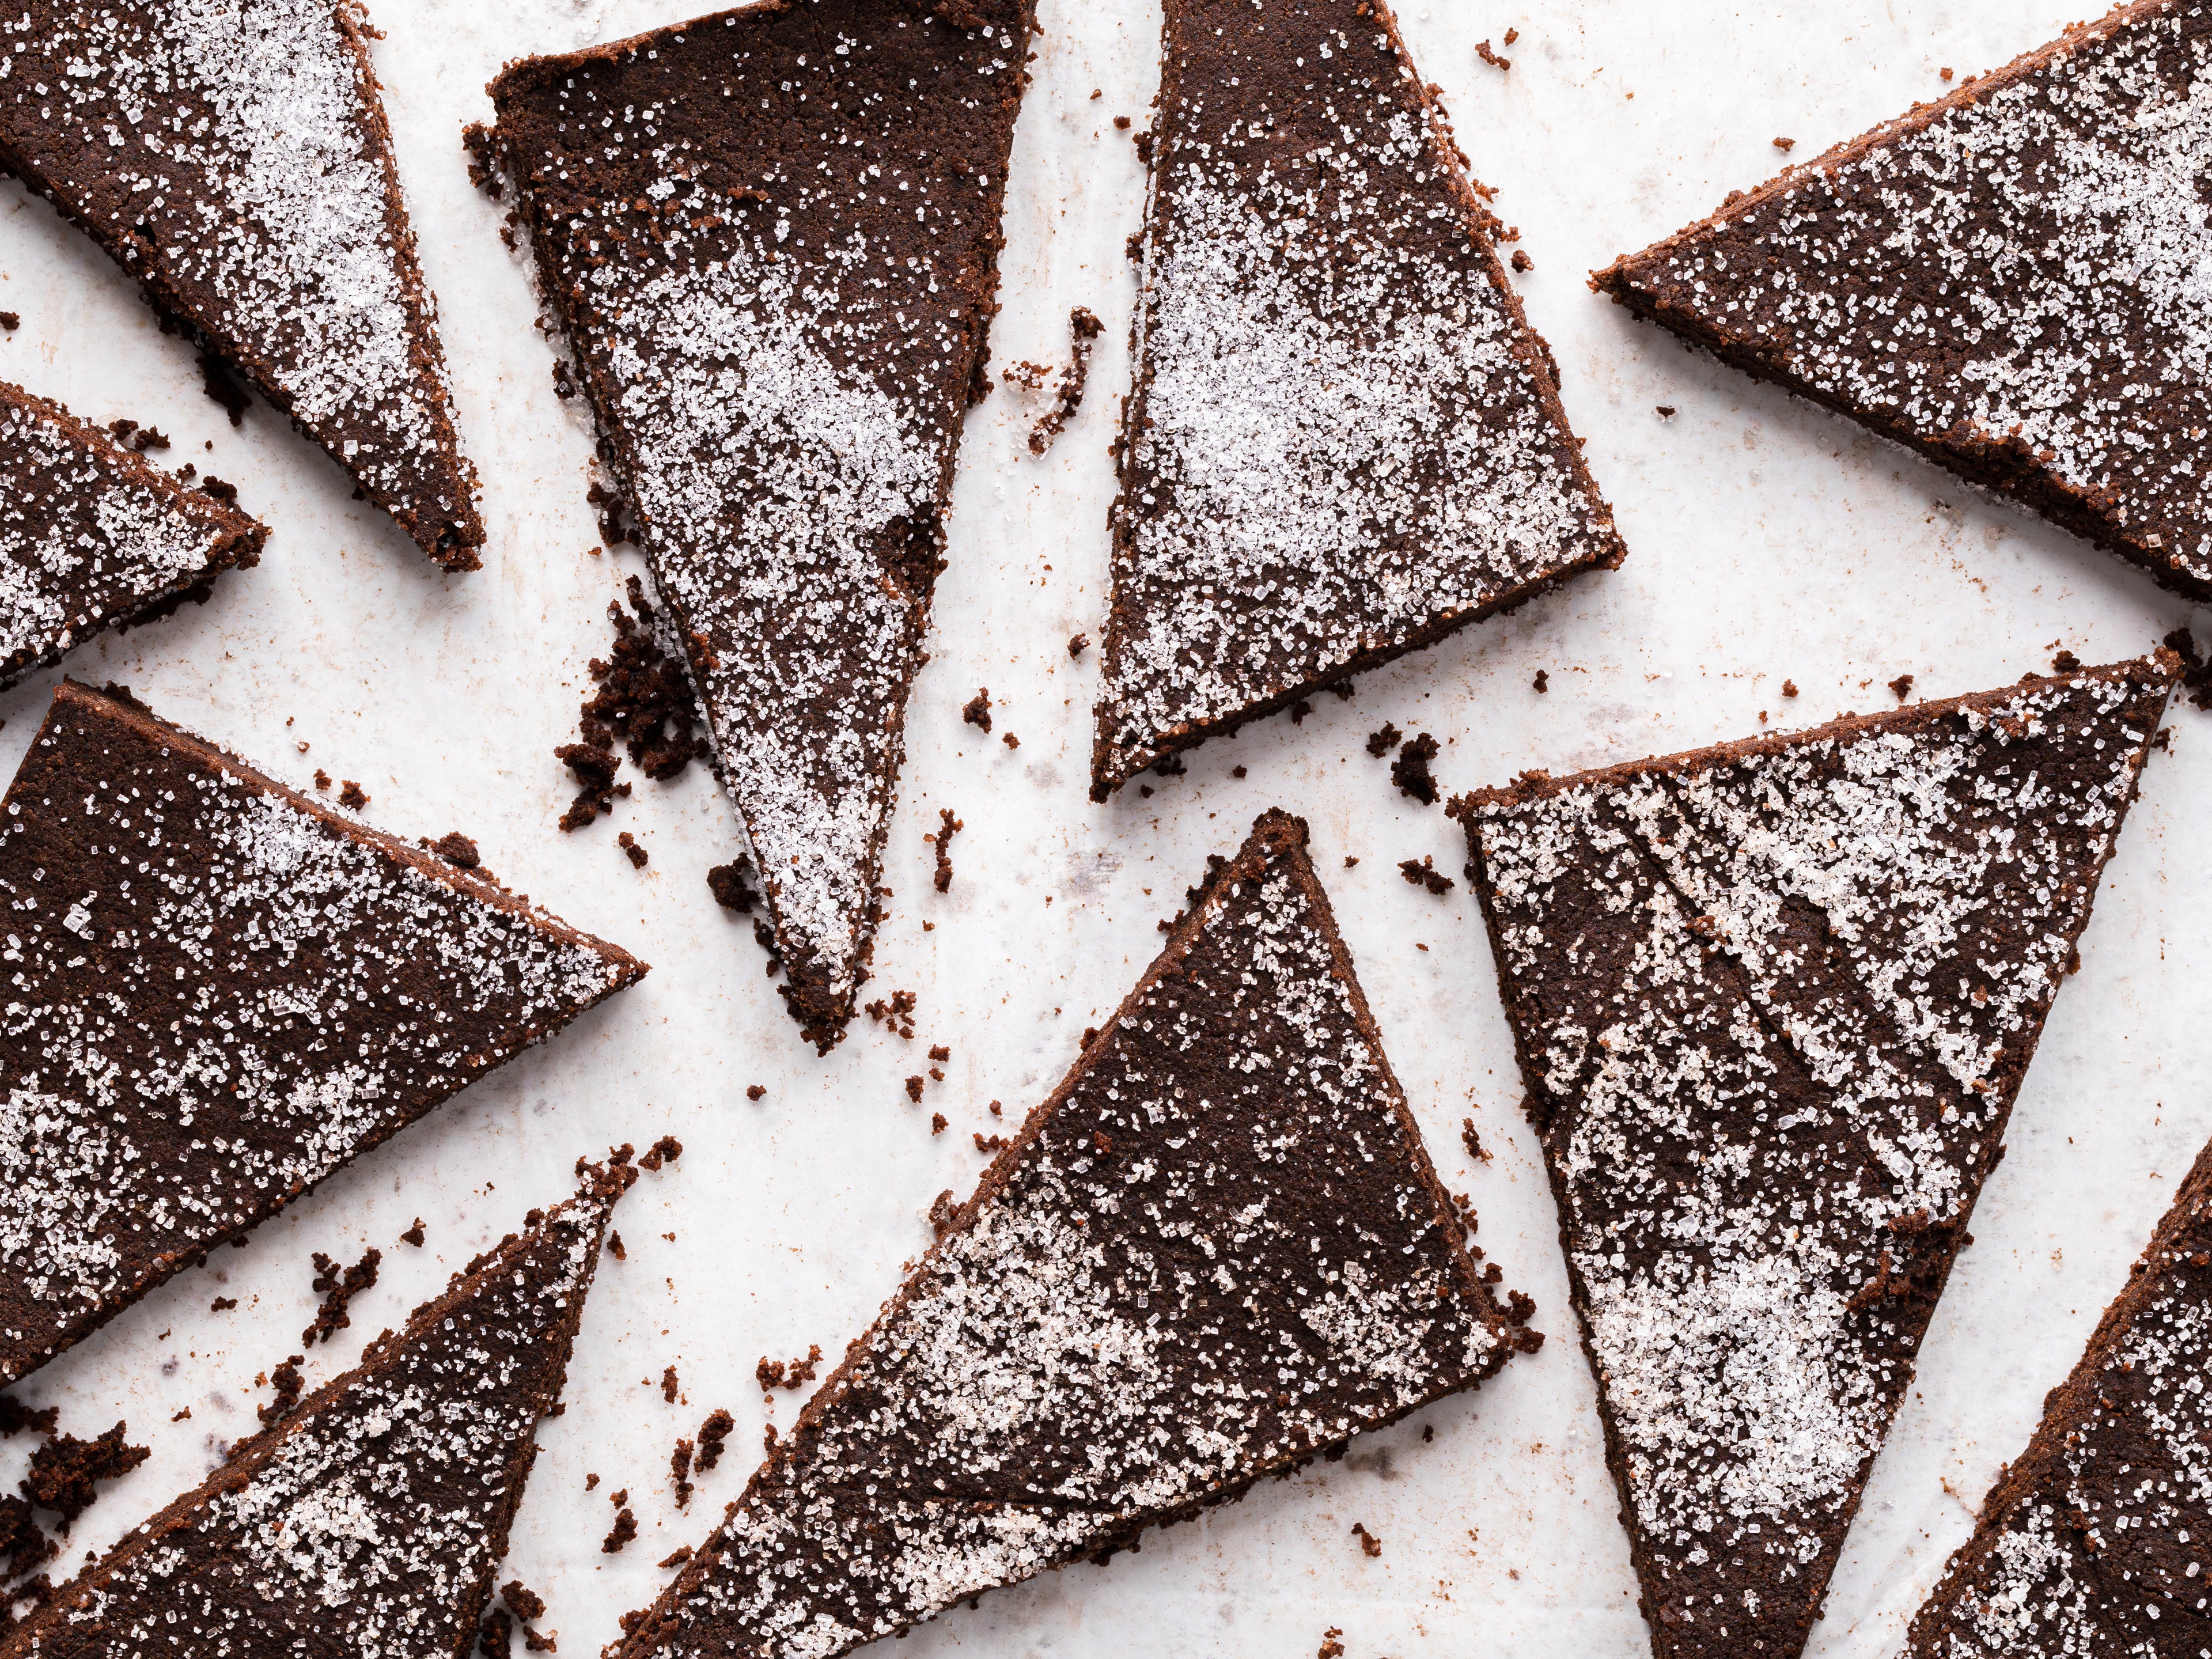 Chocolate cake cut up into triangles